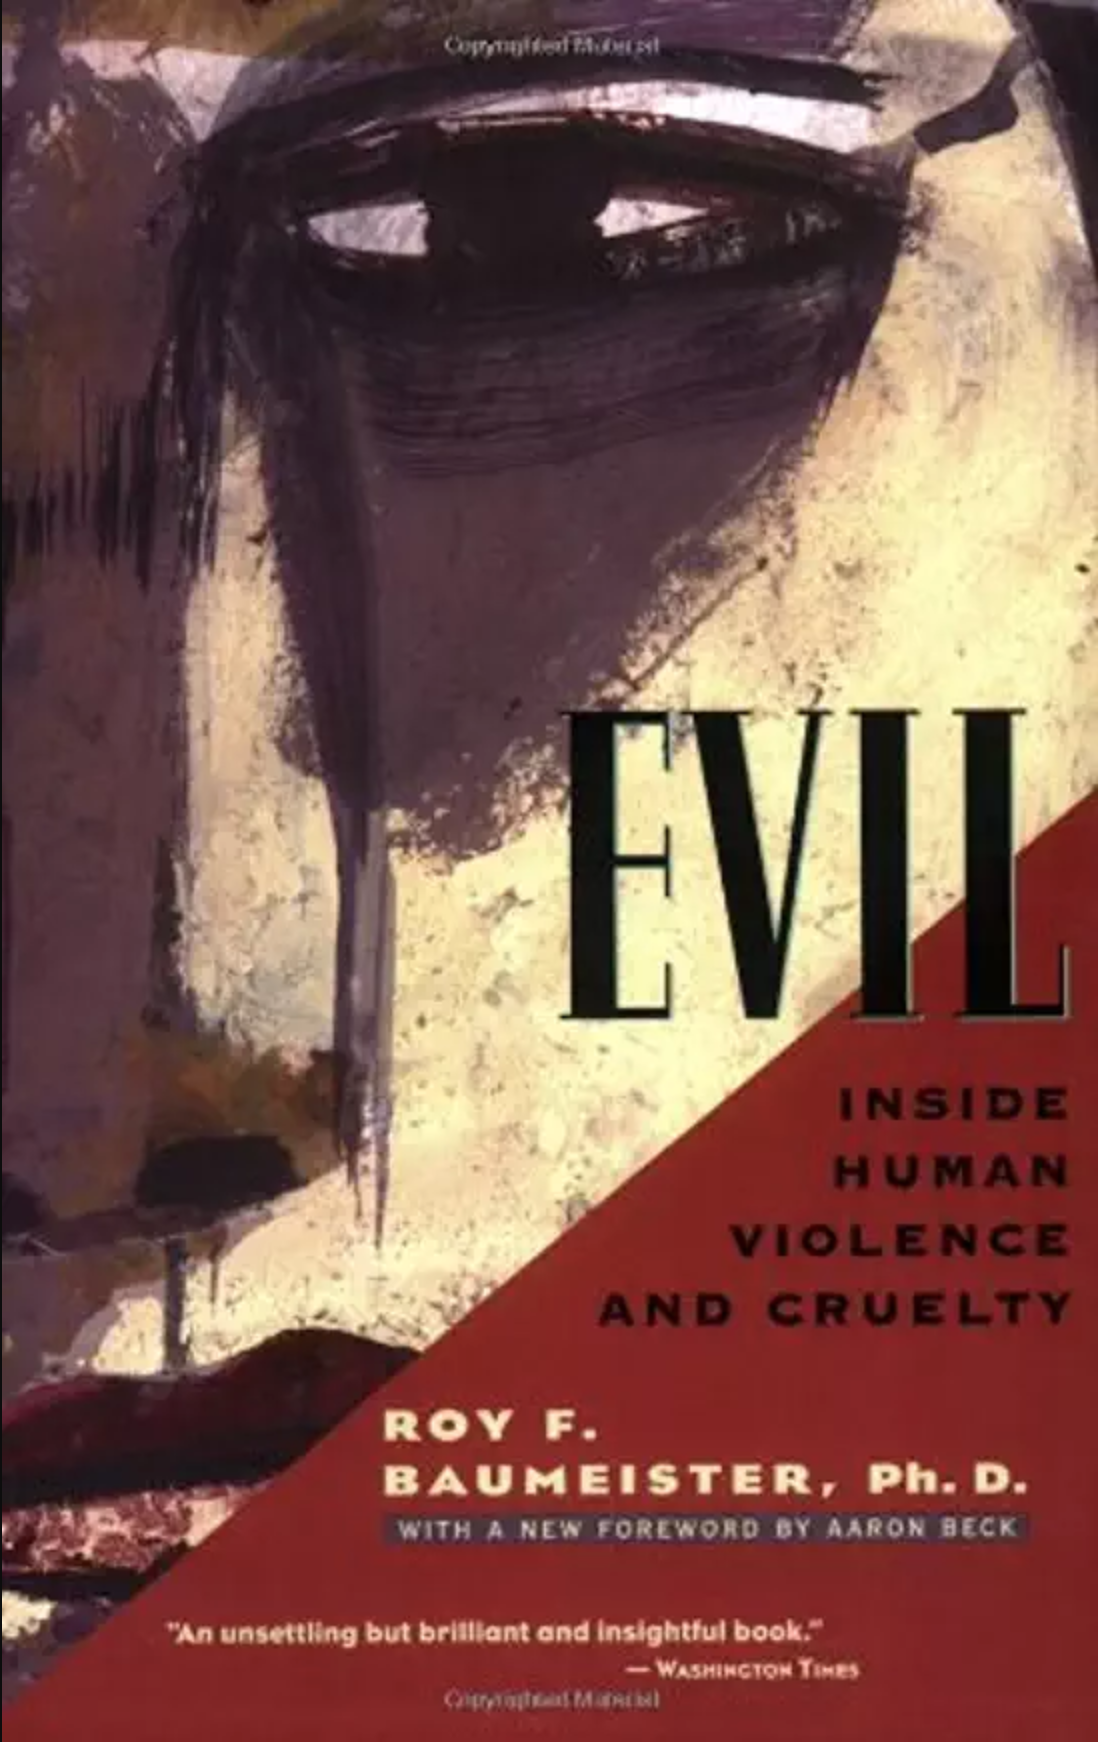 Book cover of "Evil"